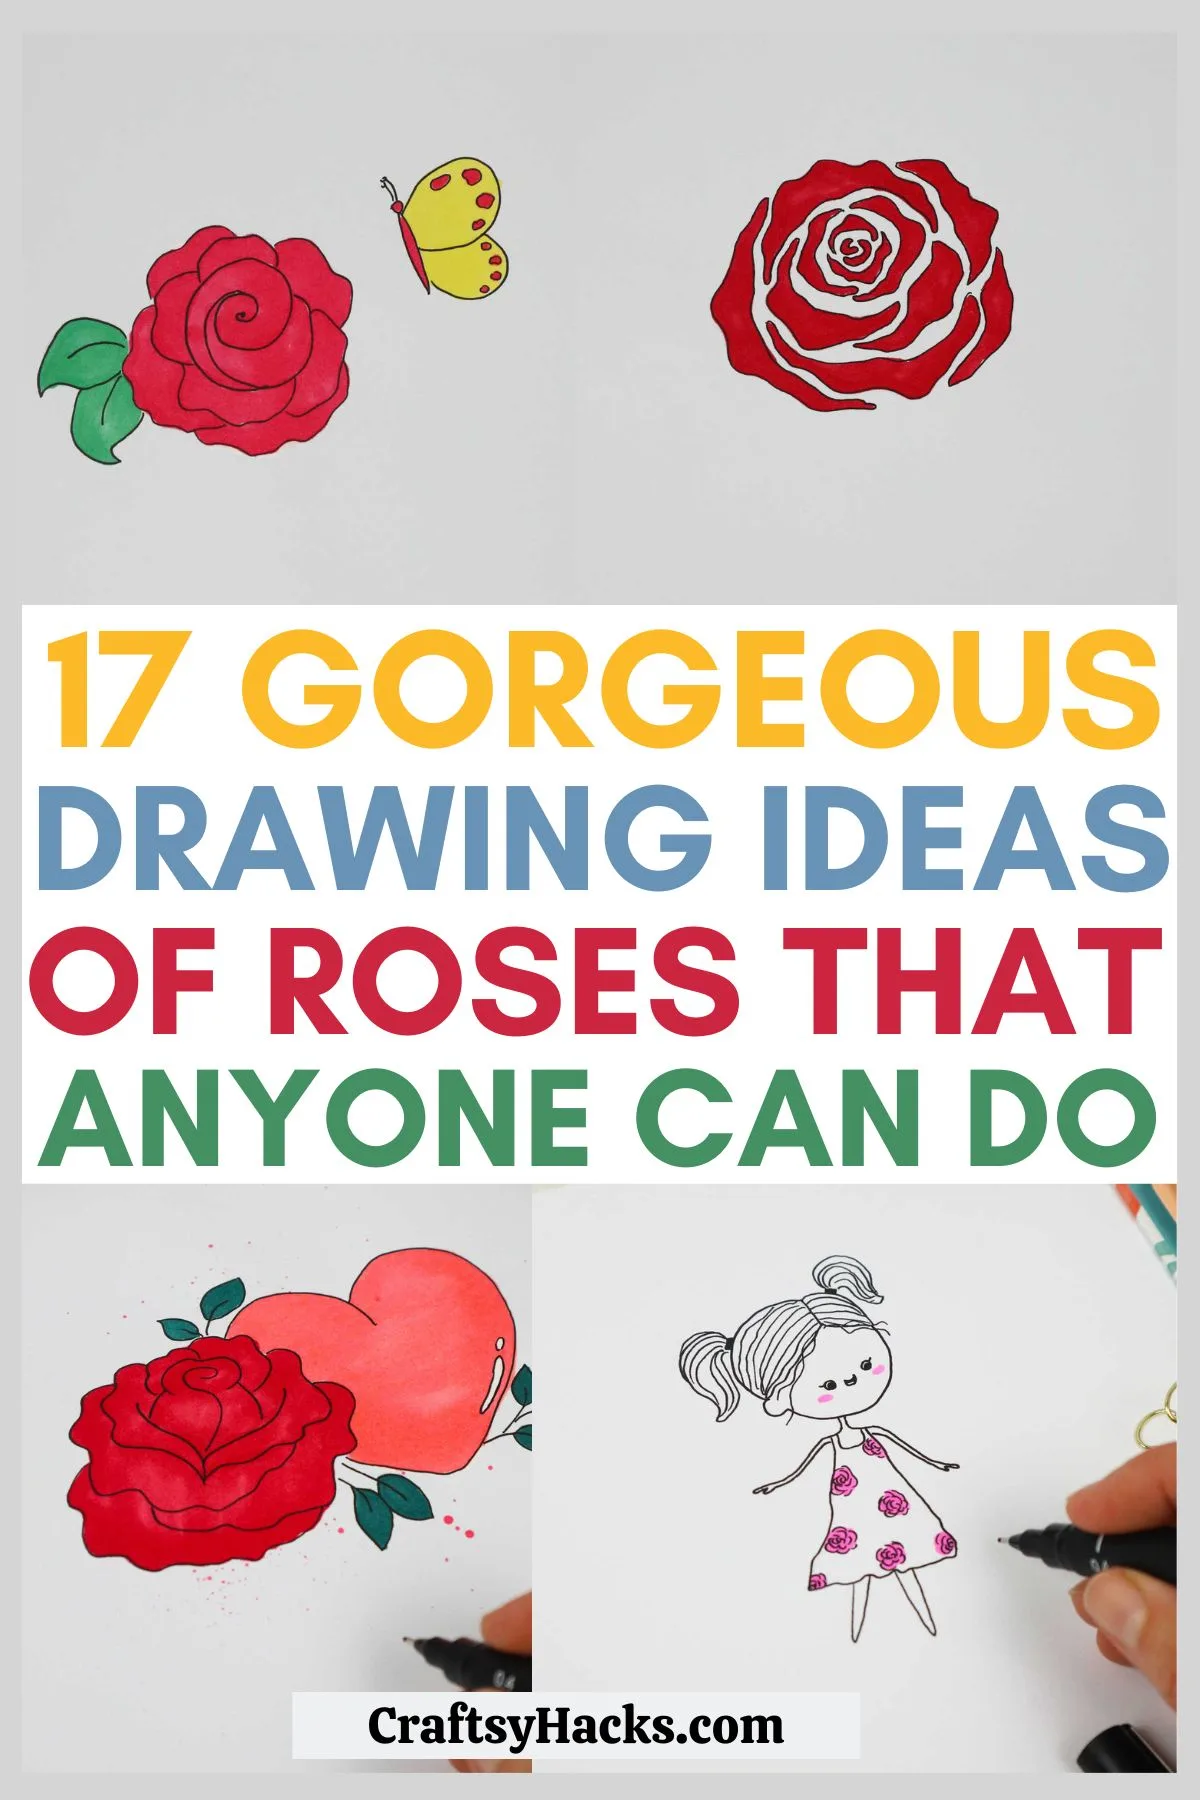 21 Easy Ways To Make A Paper Rose | Kids Activities Blog